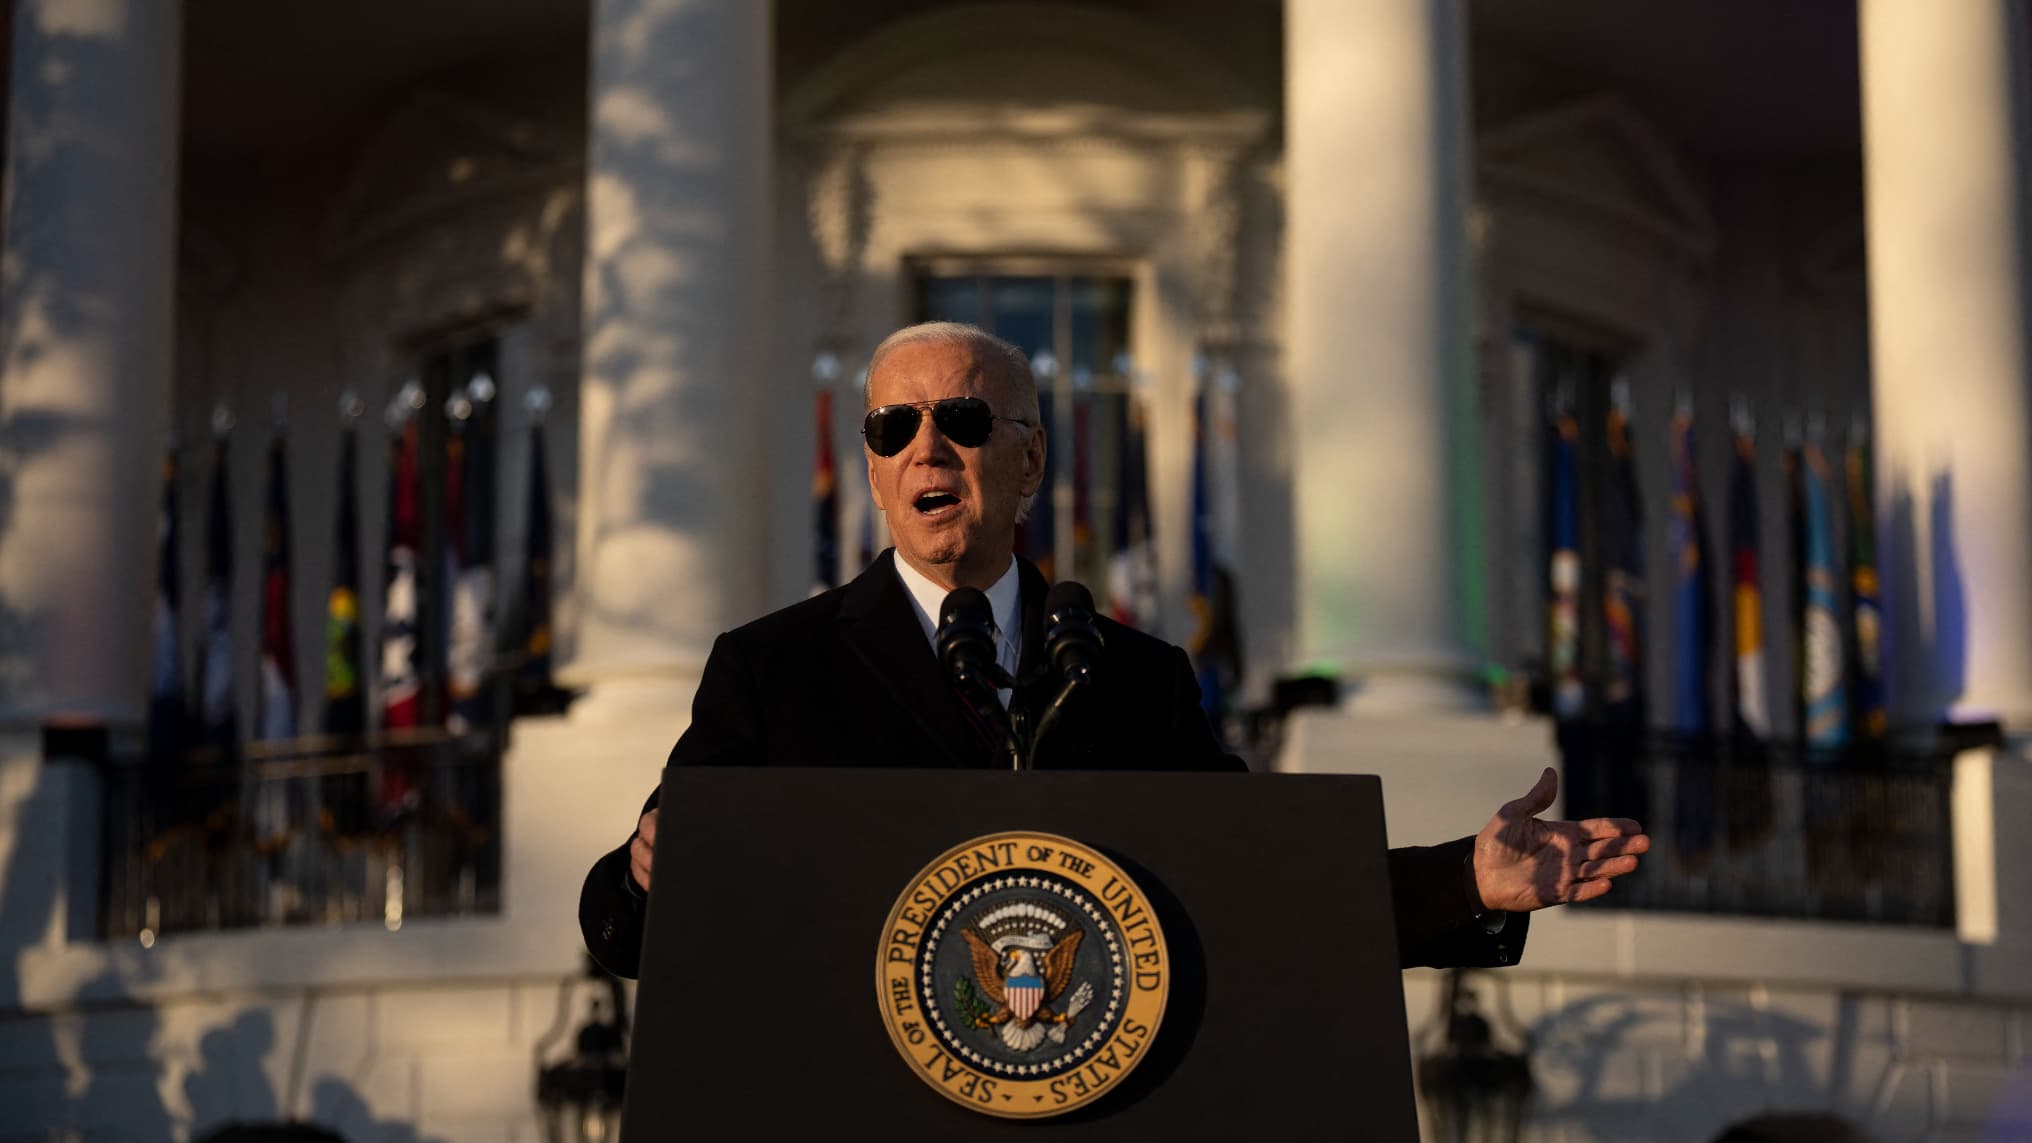 five new pages of confidential documents discovered at Joe Biden